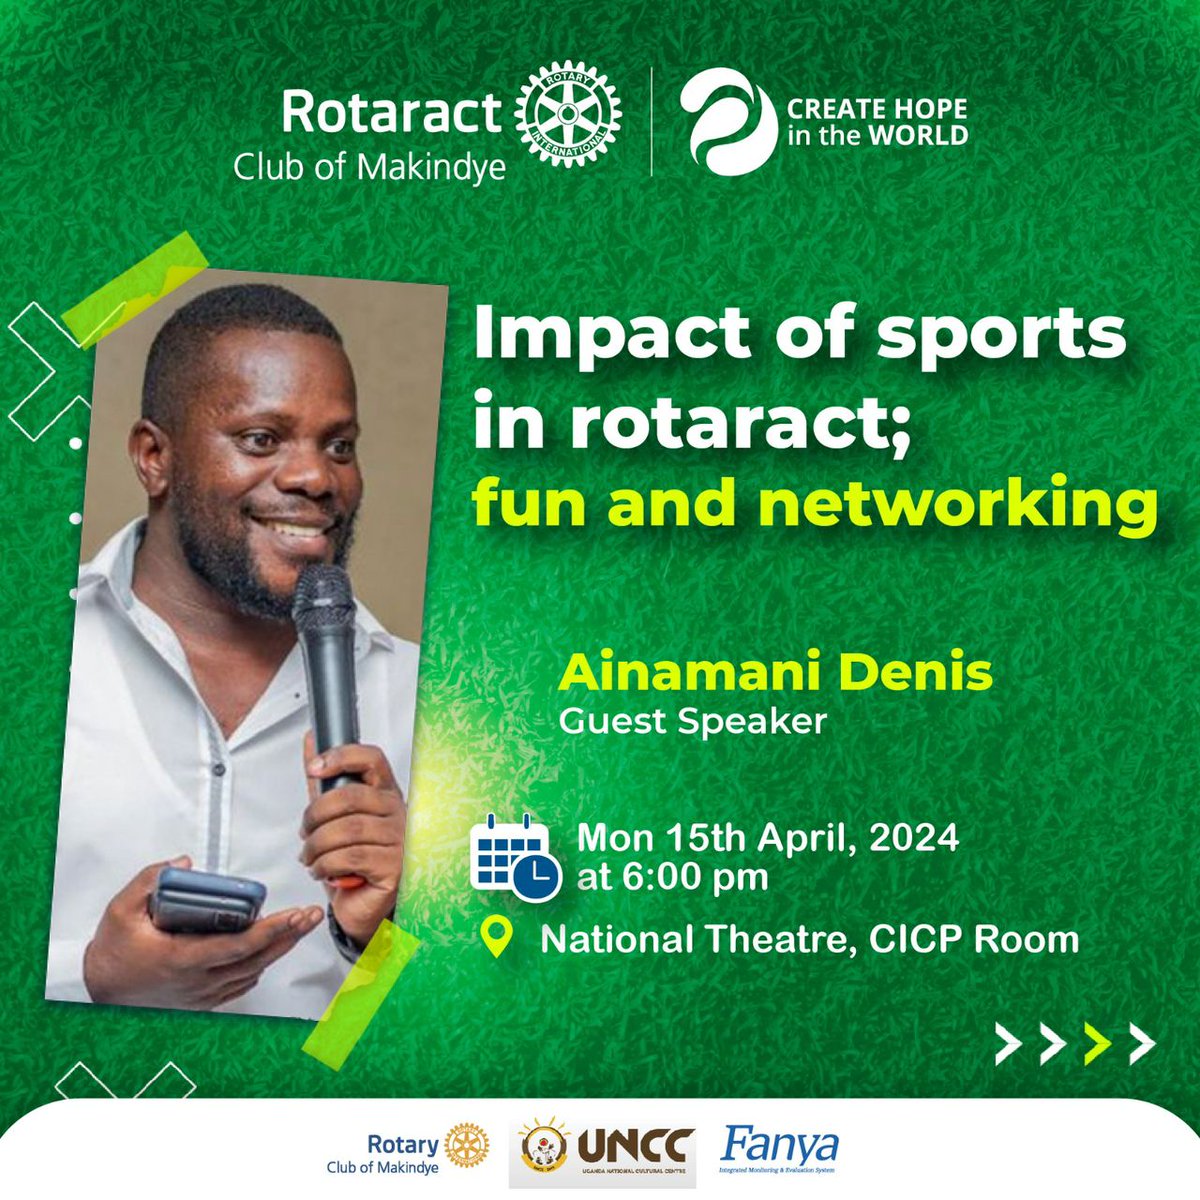 'Teamwork makes the Dream work.' Ladies and Gentlemen, pliz gather around as we listen in on The Impact of Sports in Rotarct By PP. Ainamani Denis This Monday 15th,April 2024 at 6pm at National Theatre. #WeLoveHostingYou #WeAreTheManking #FlyBeyond